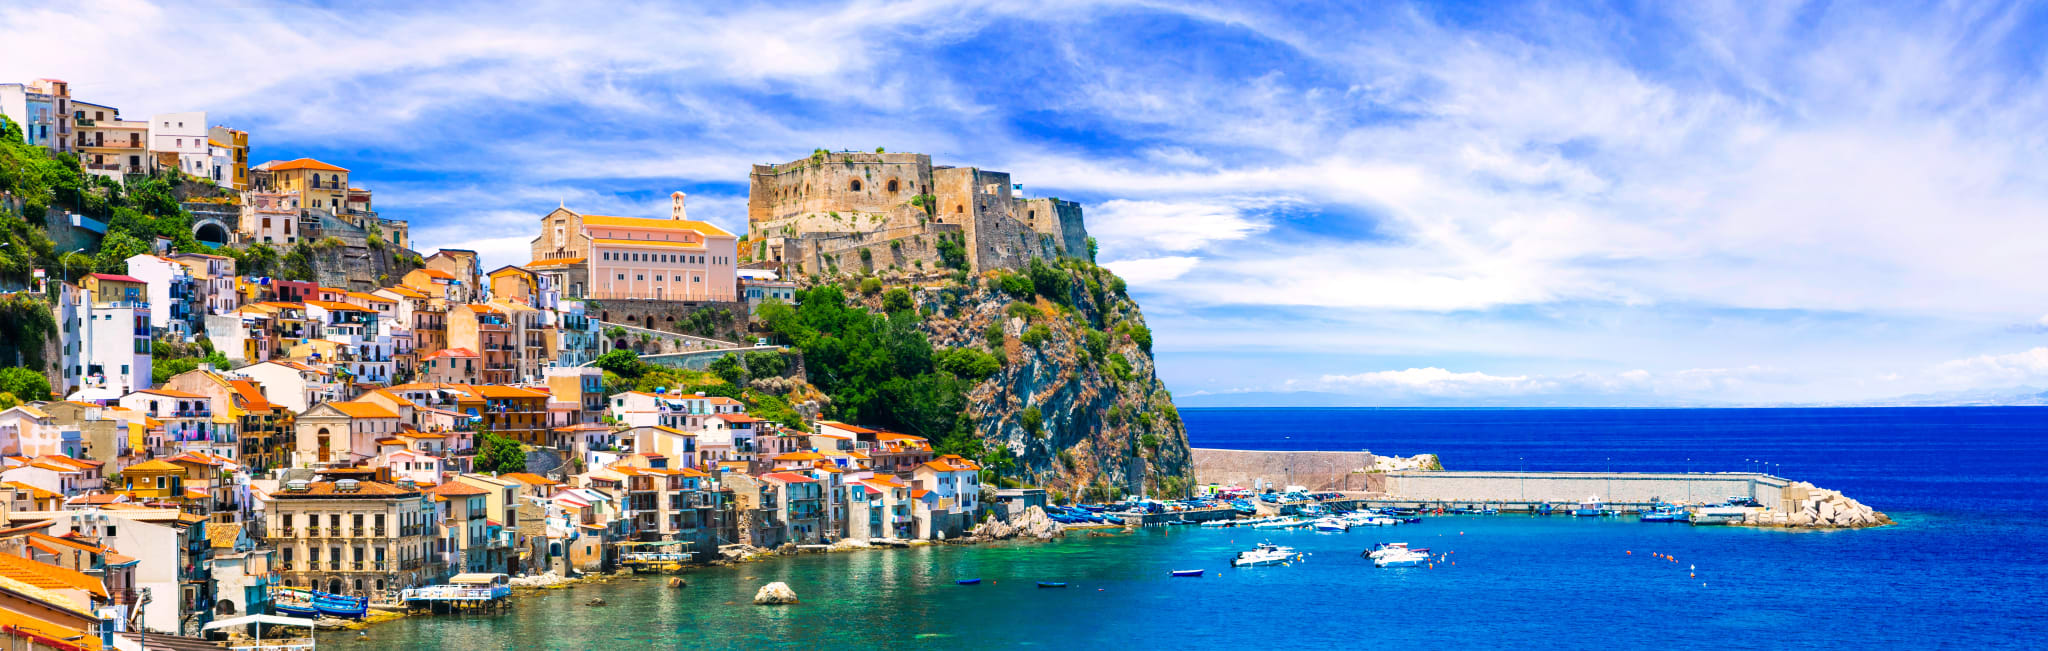 Best Southern Italy & Sicily Tours 20192020